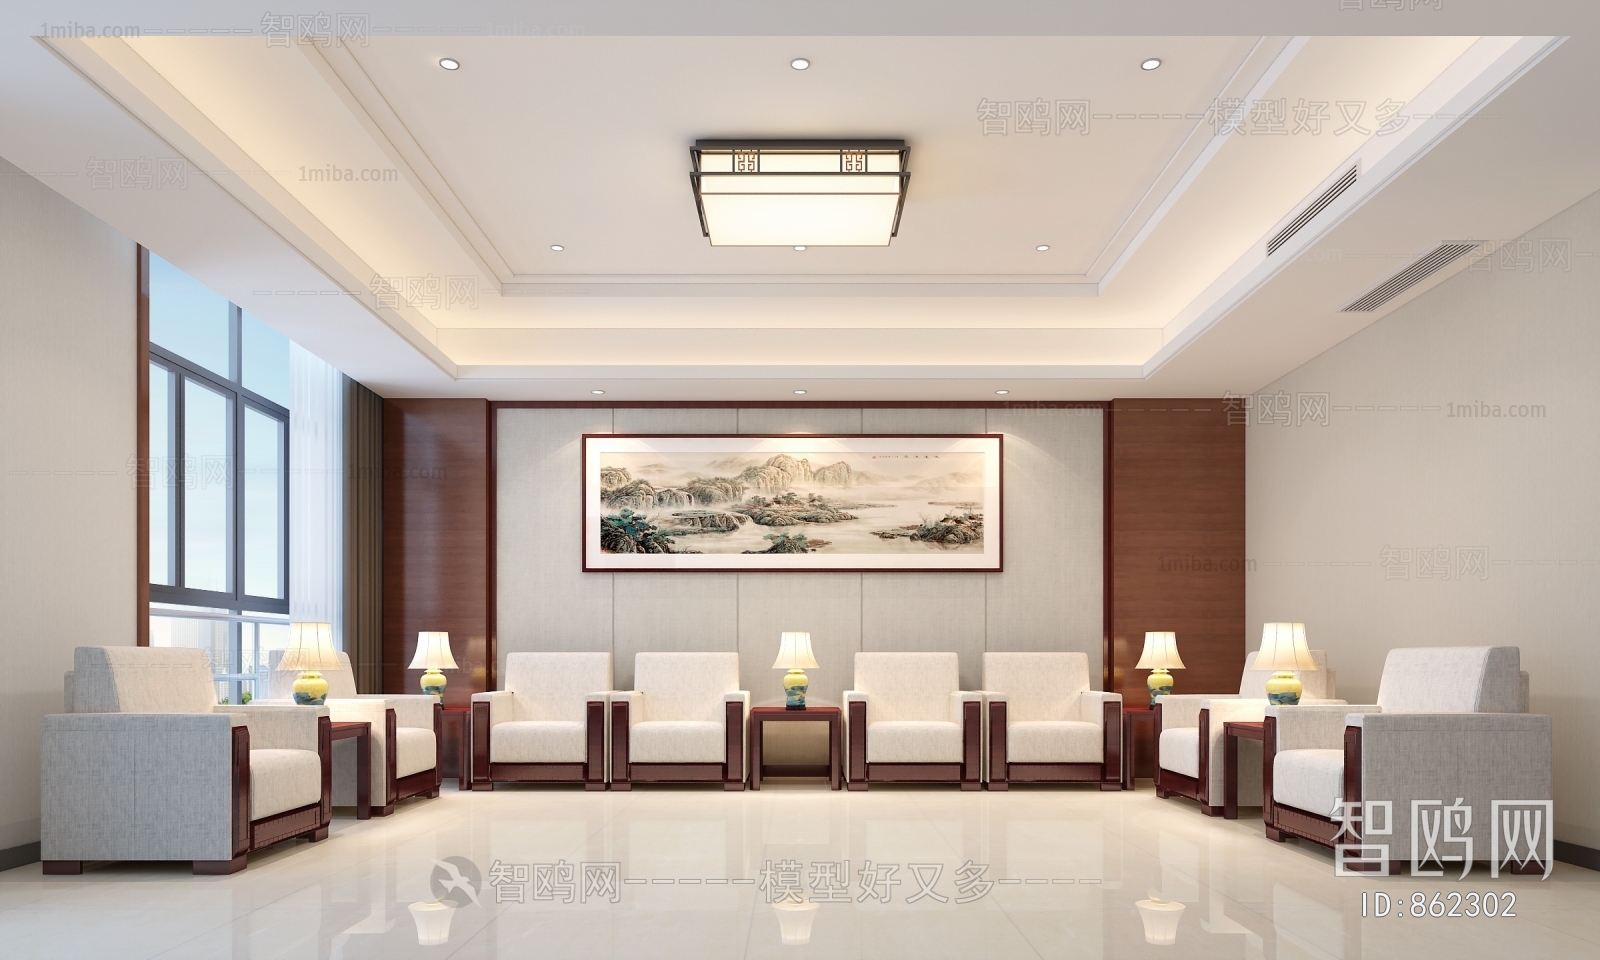 Chinese Style Reception Room